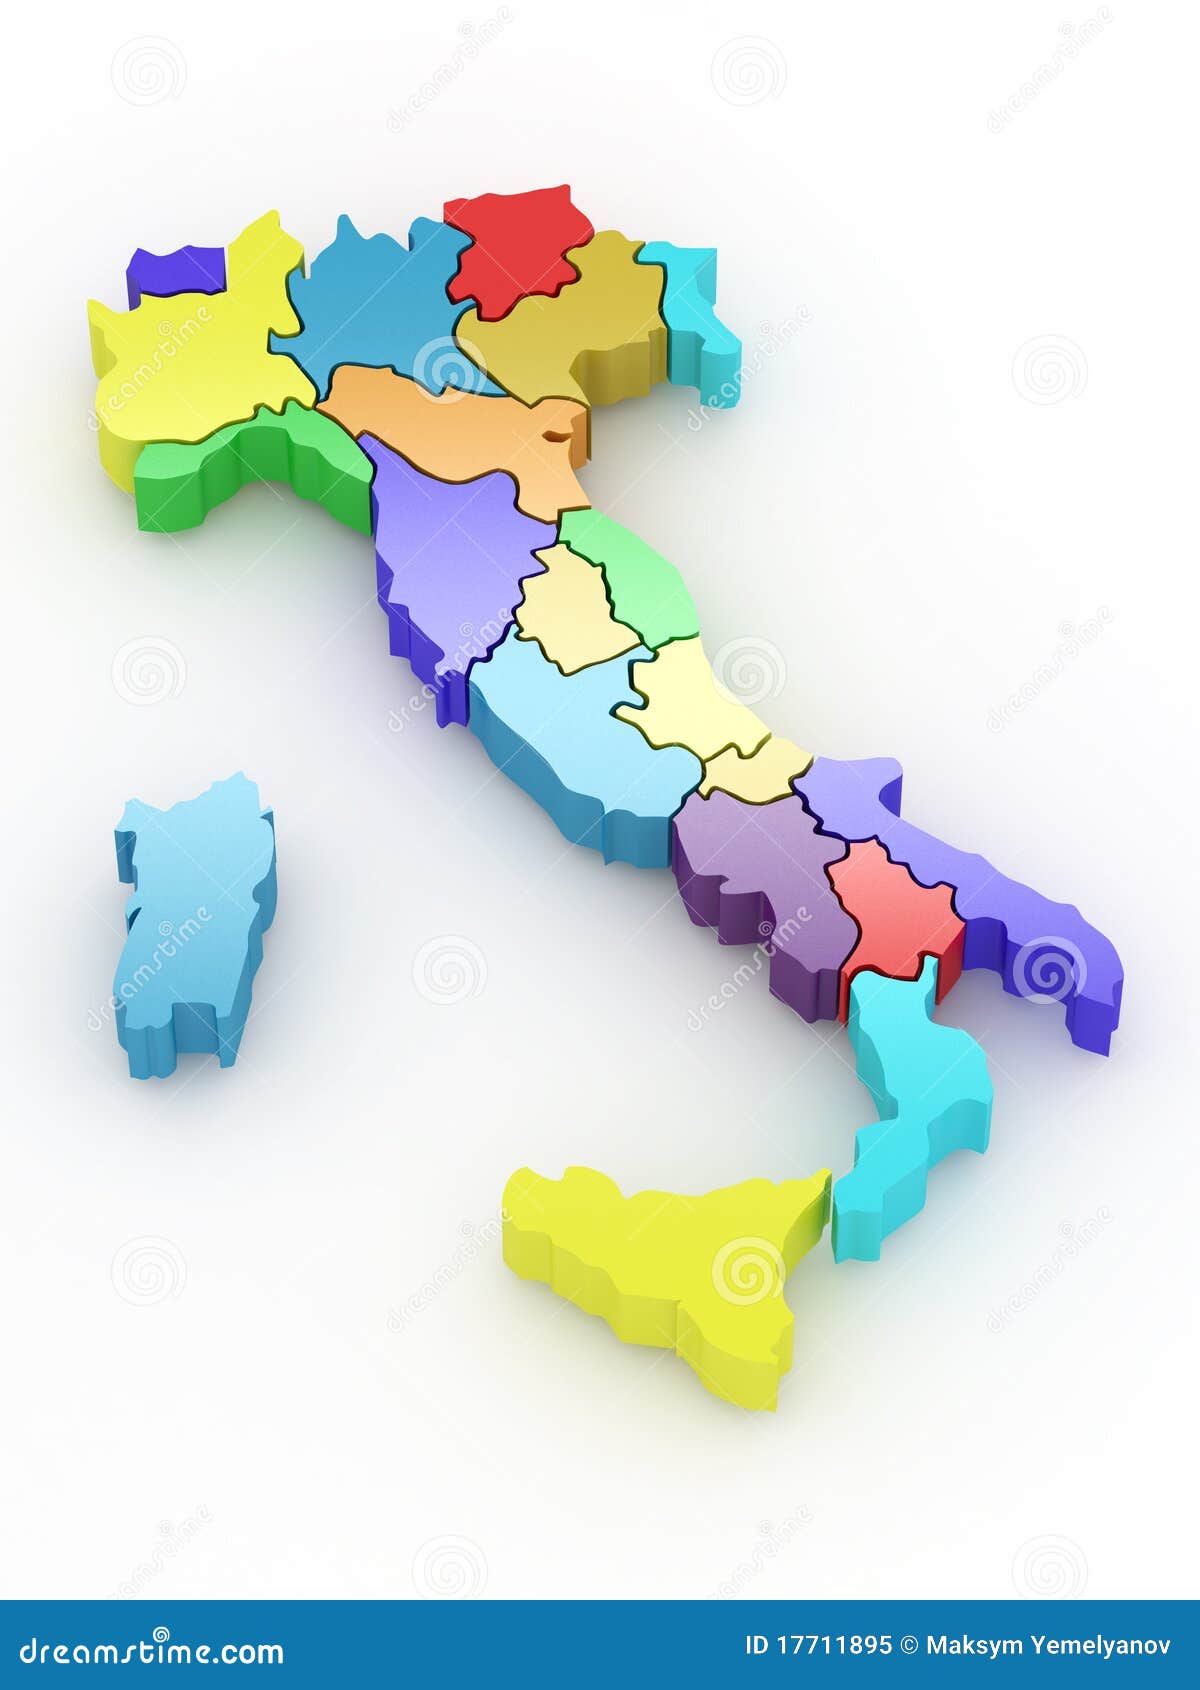 three-dimensional map of italy. 3d